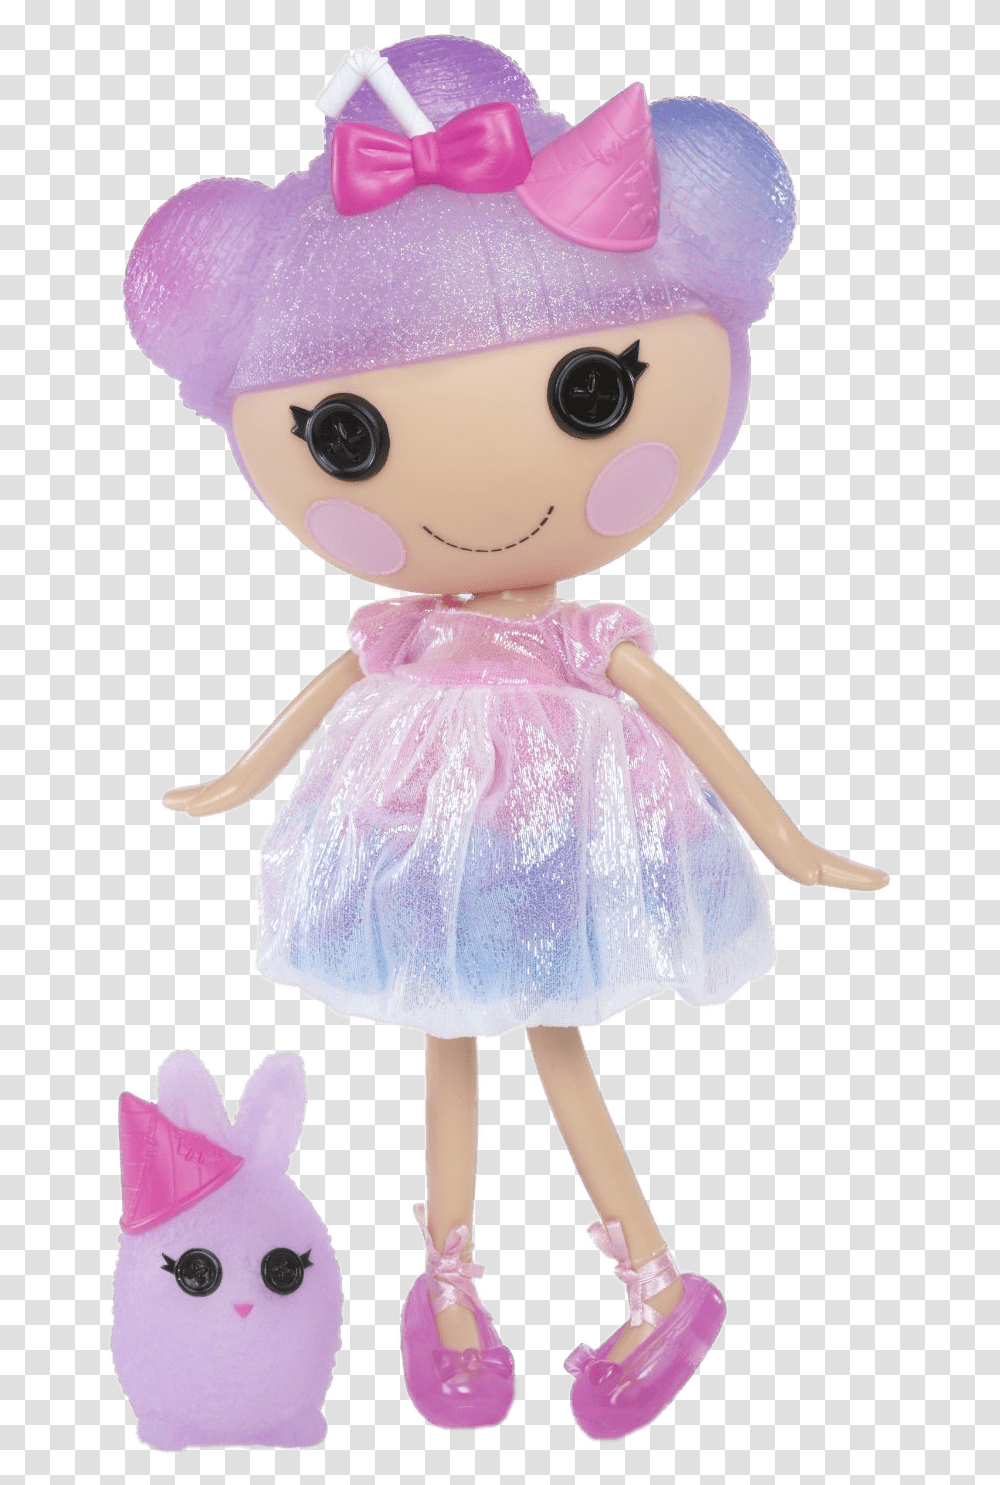 Lalaloopsy Frost I Lalaloopsy Frost Ic Cone, Doll, Toy, Barbie, Figurine Transparent Png